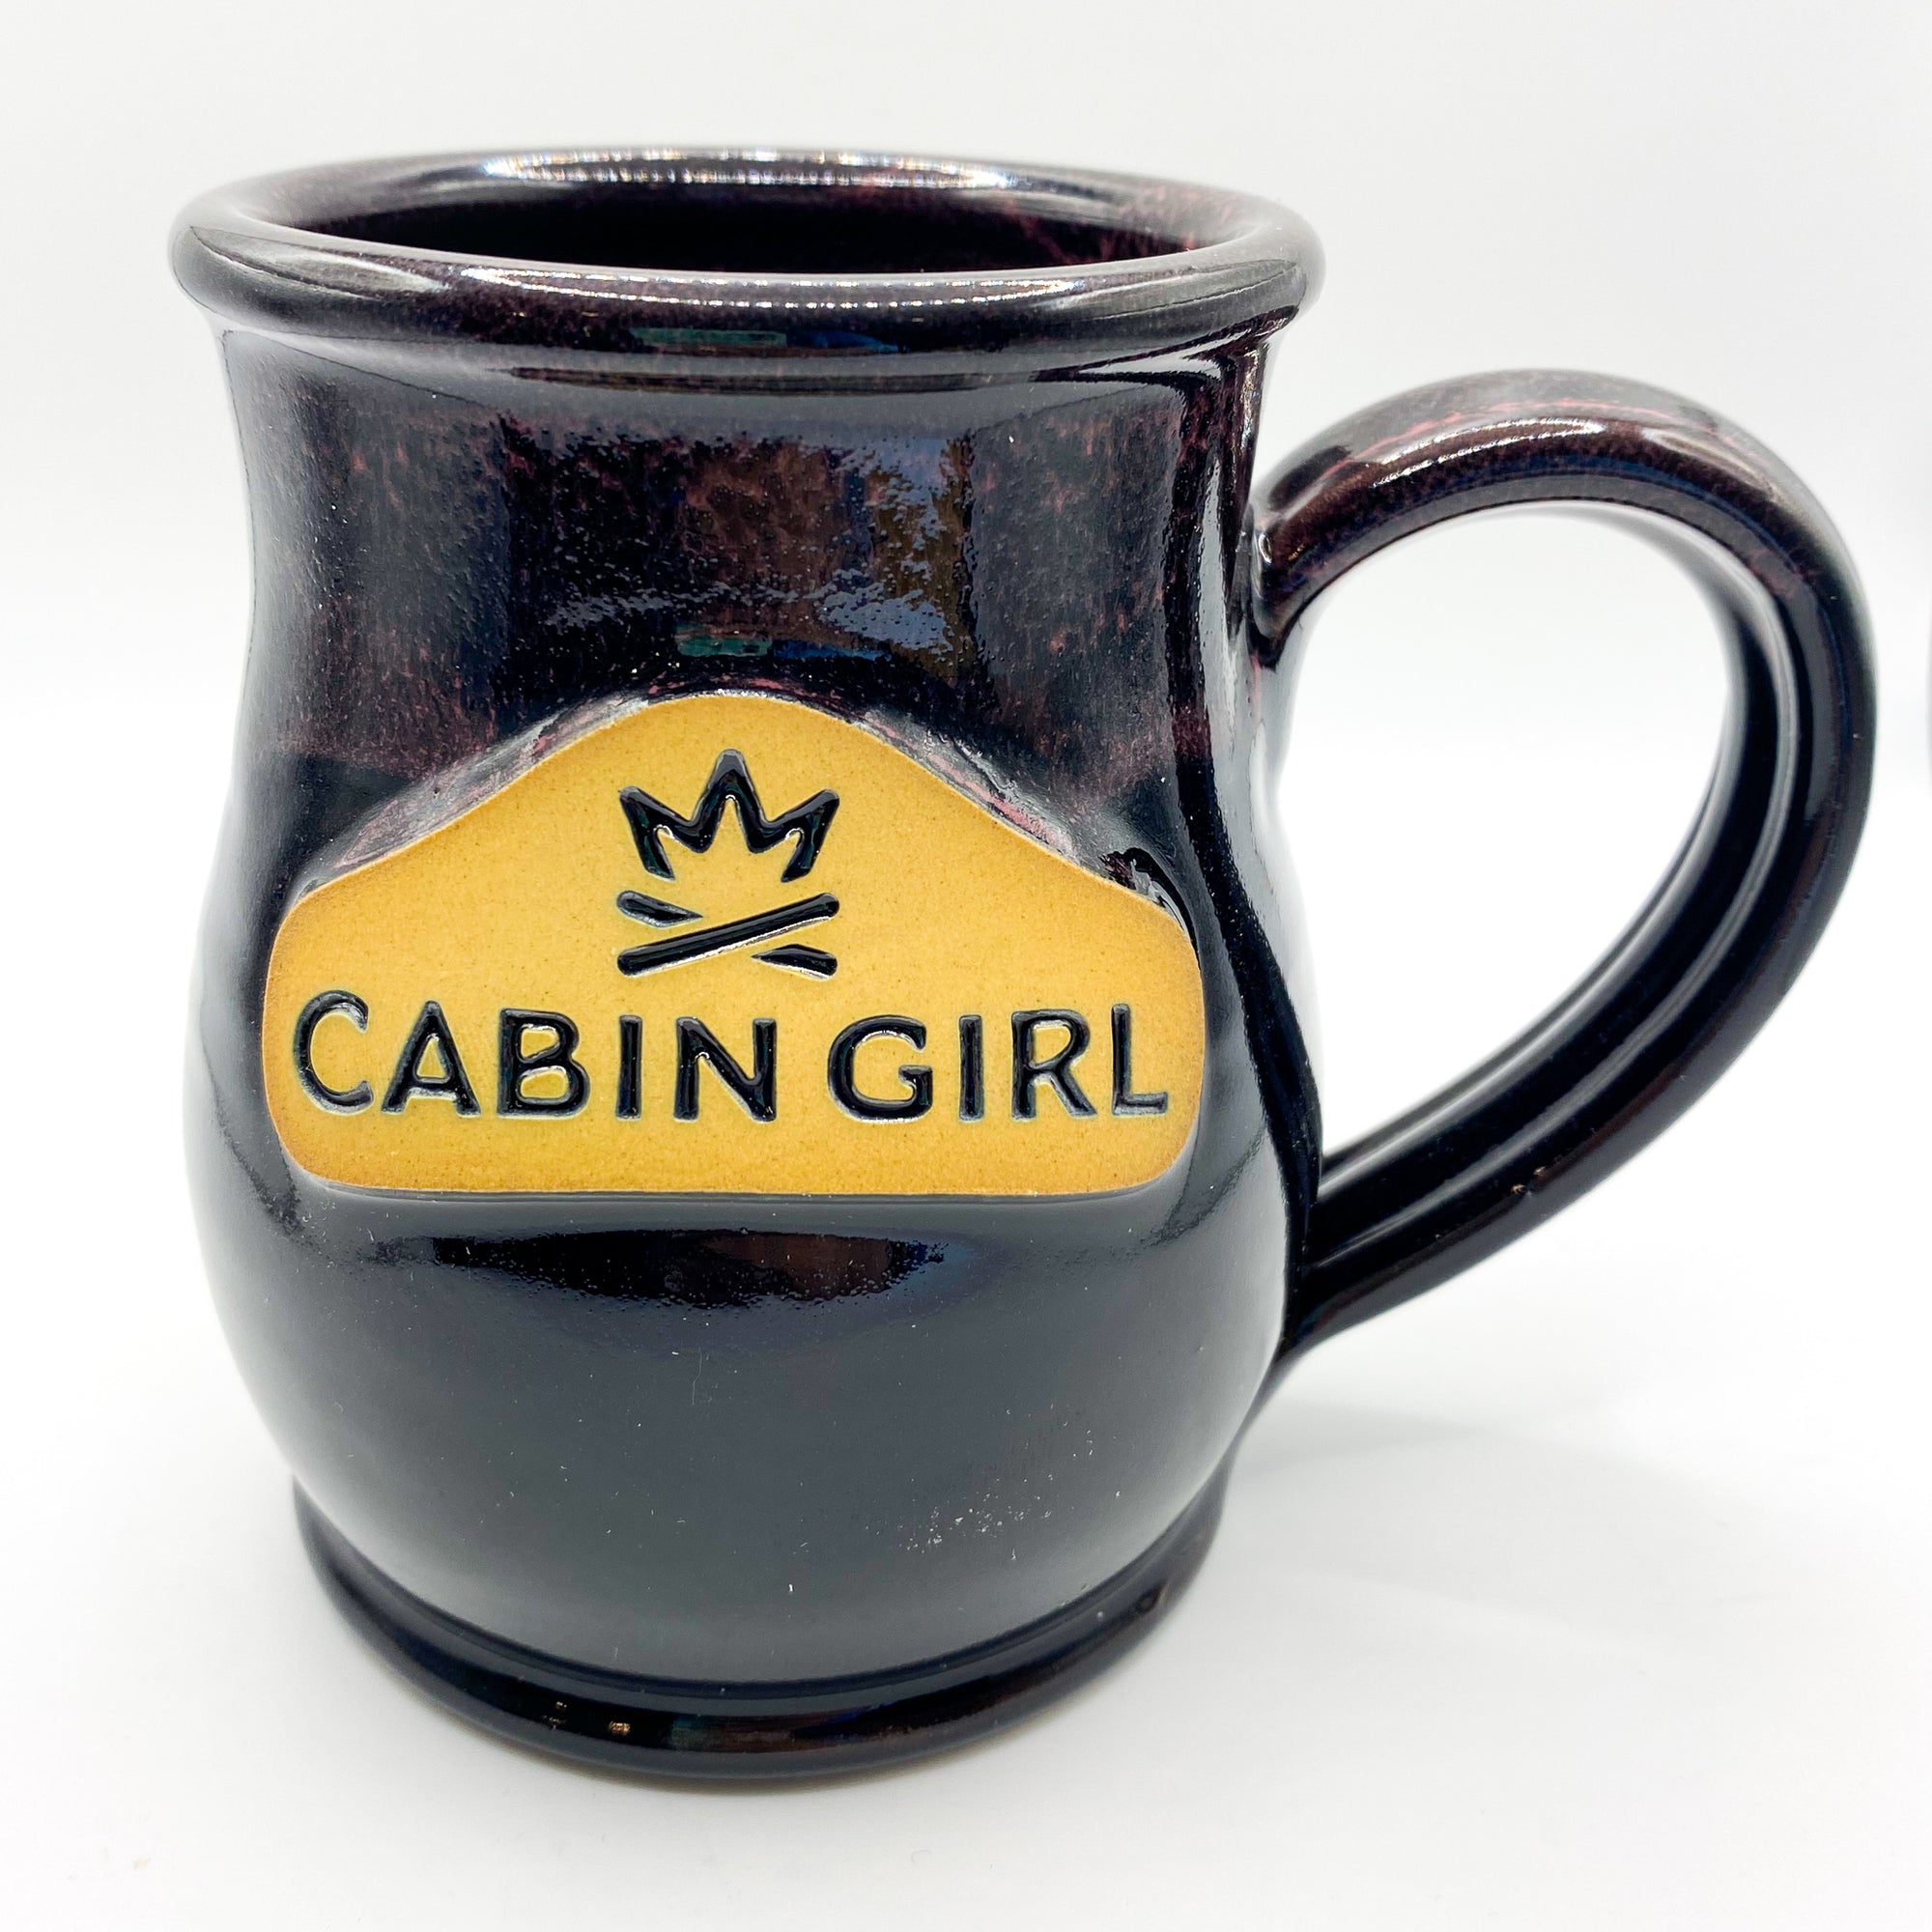 Cabin Girl coffee and drinks